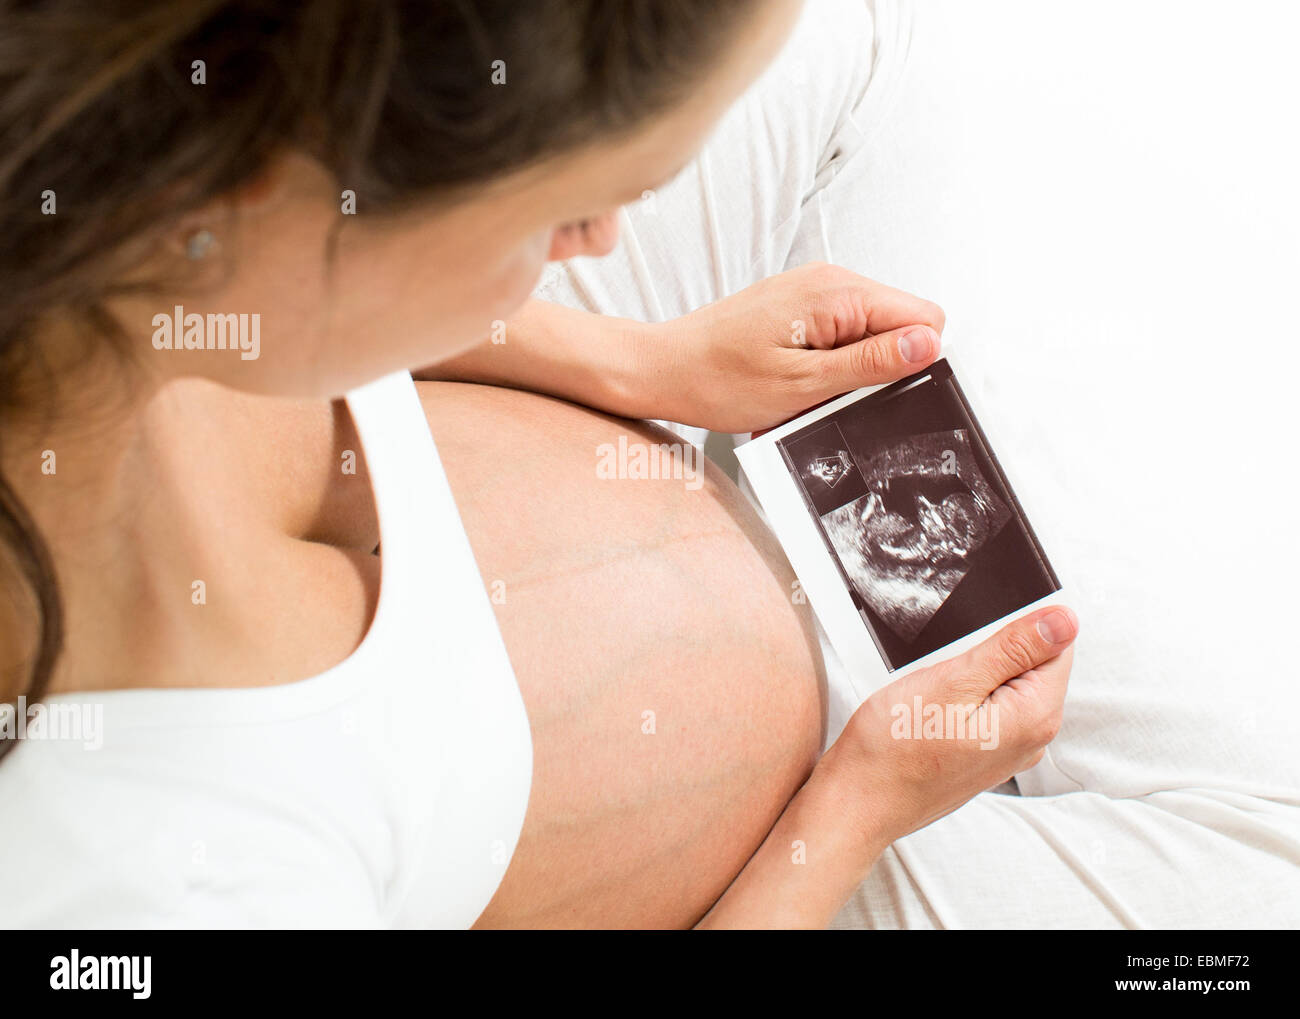 Pregnant woman looking at baby scan Banque D'Images